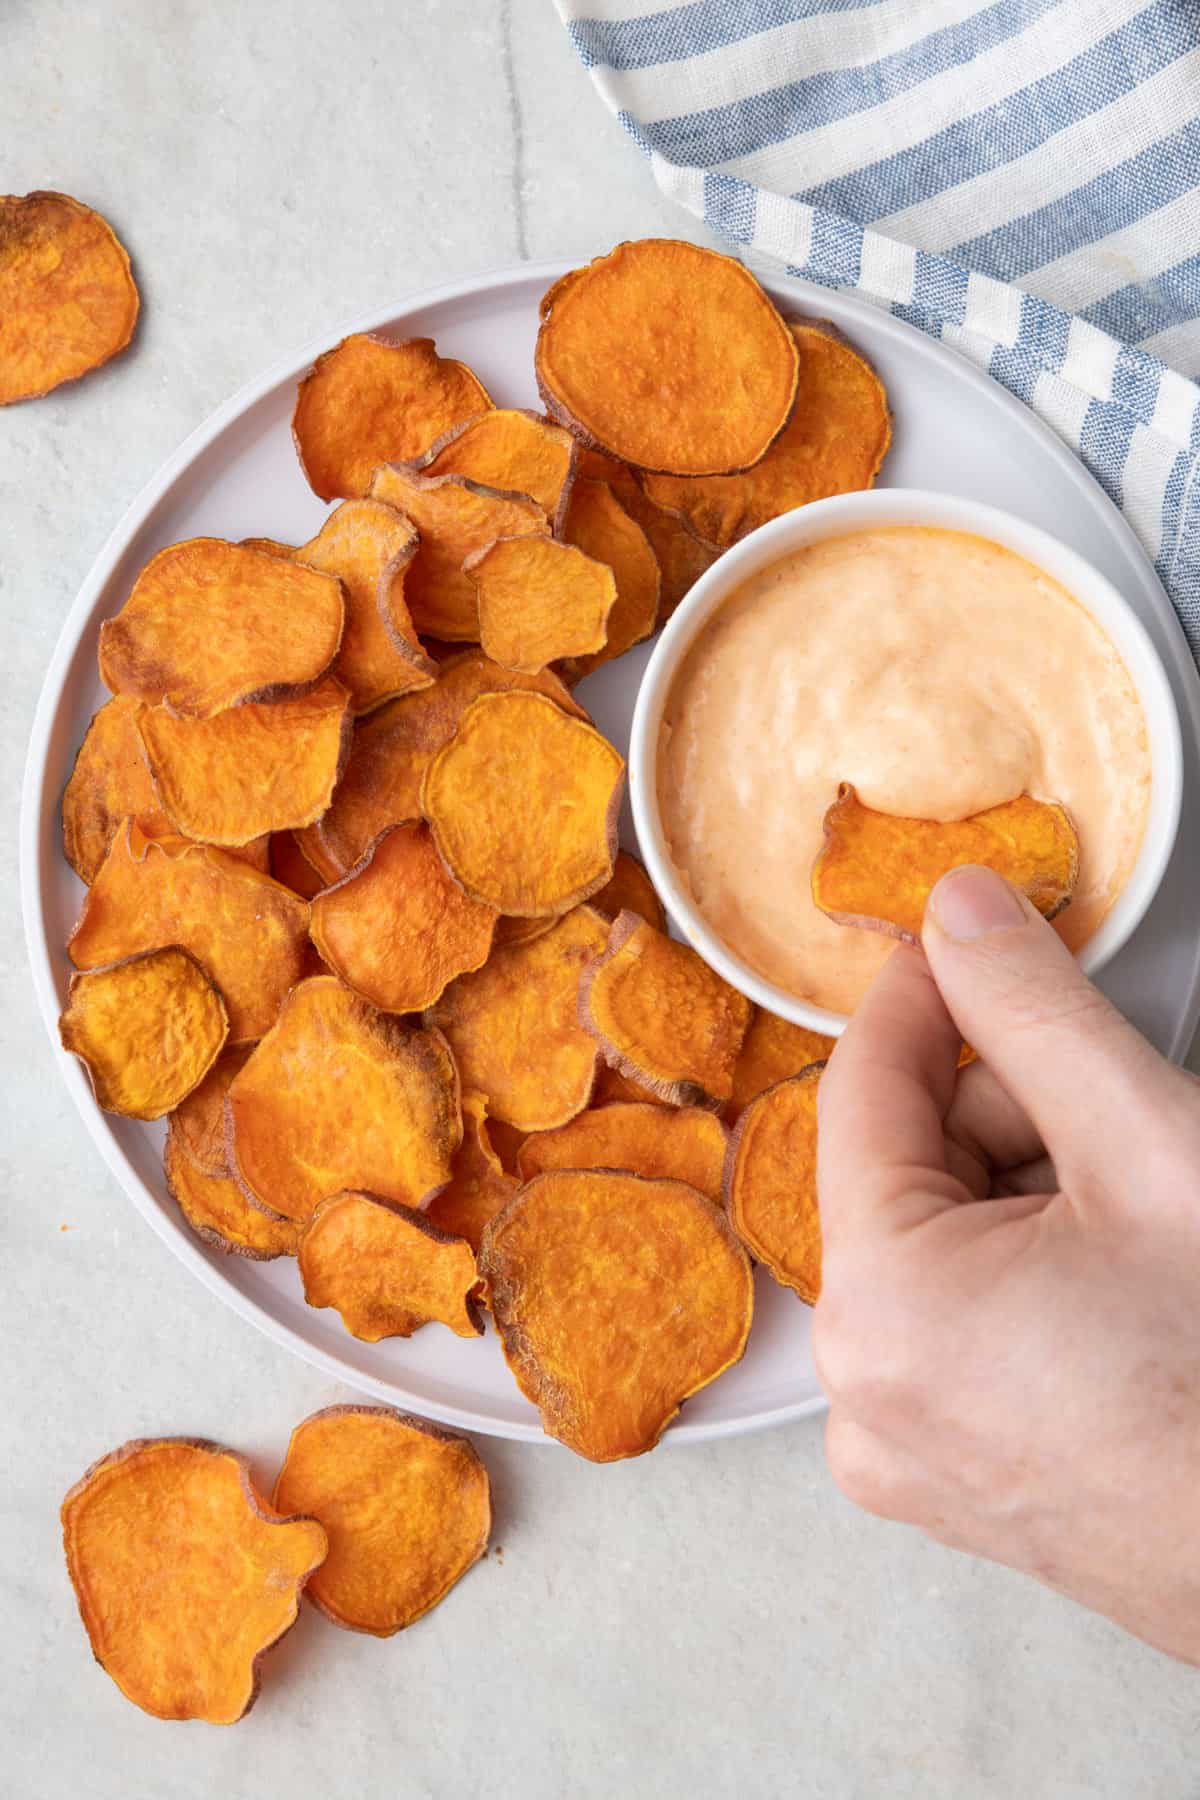 Plate of sweet potato chips with one chip being dipped into spicy mayo.